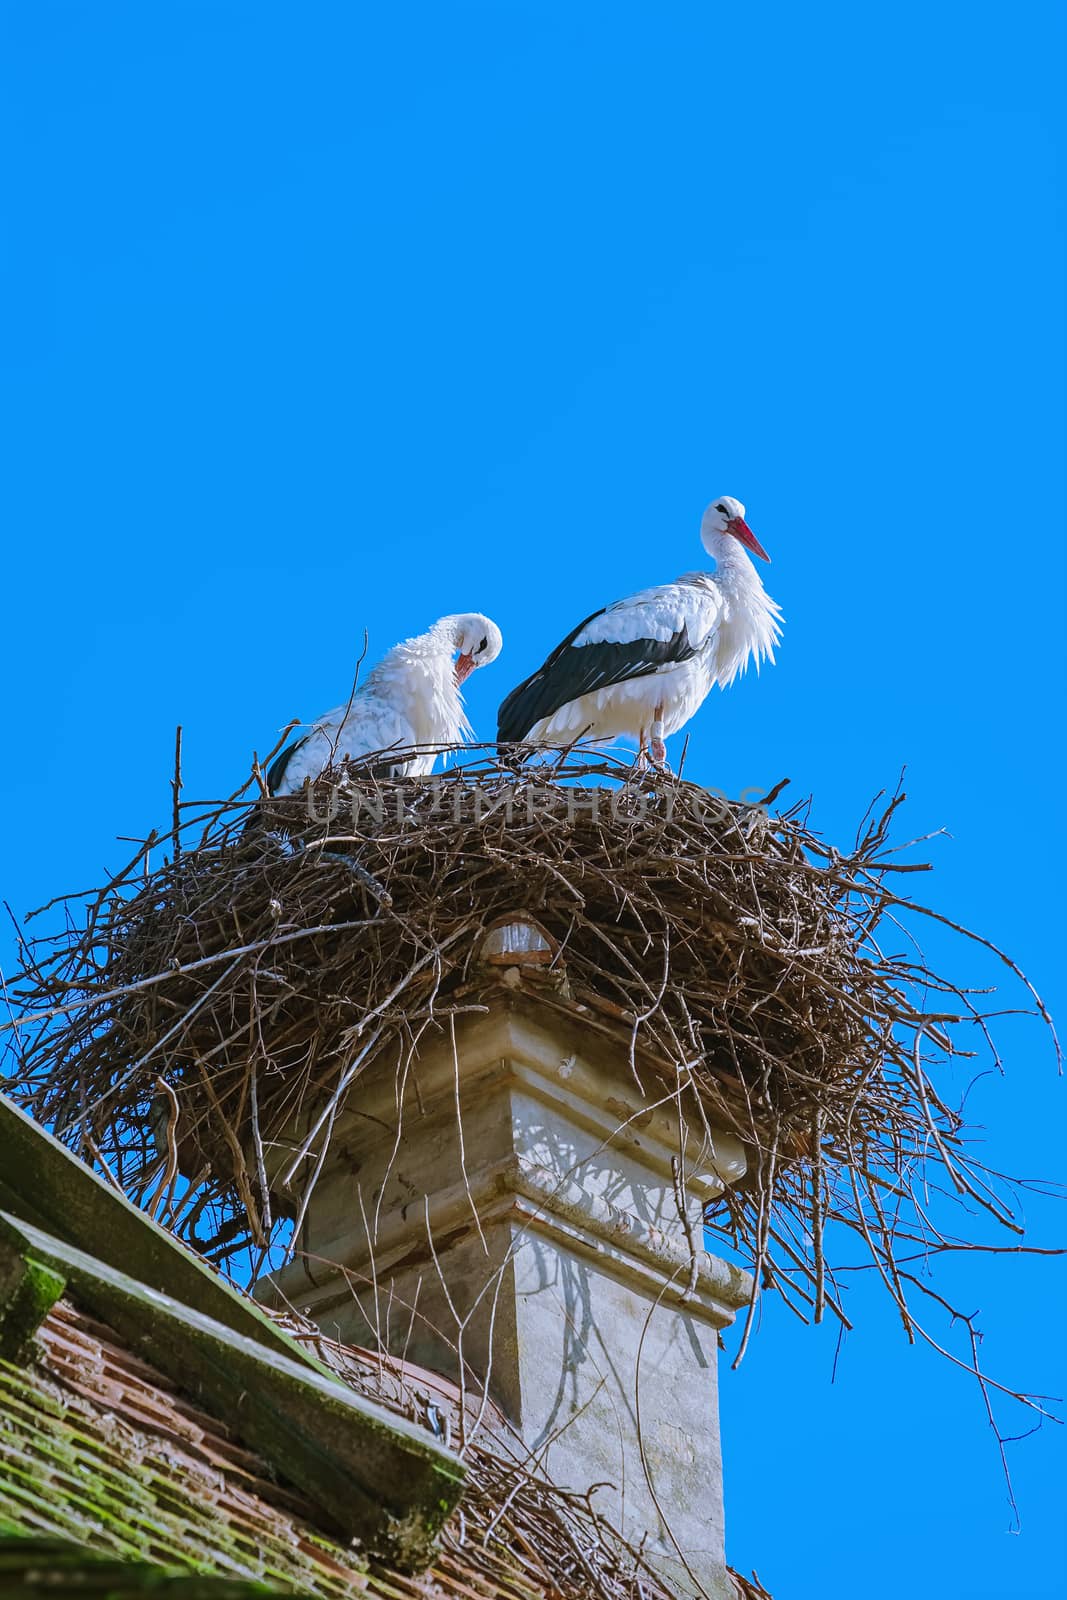 Storks in a nest on a house chimney